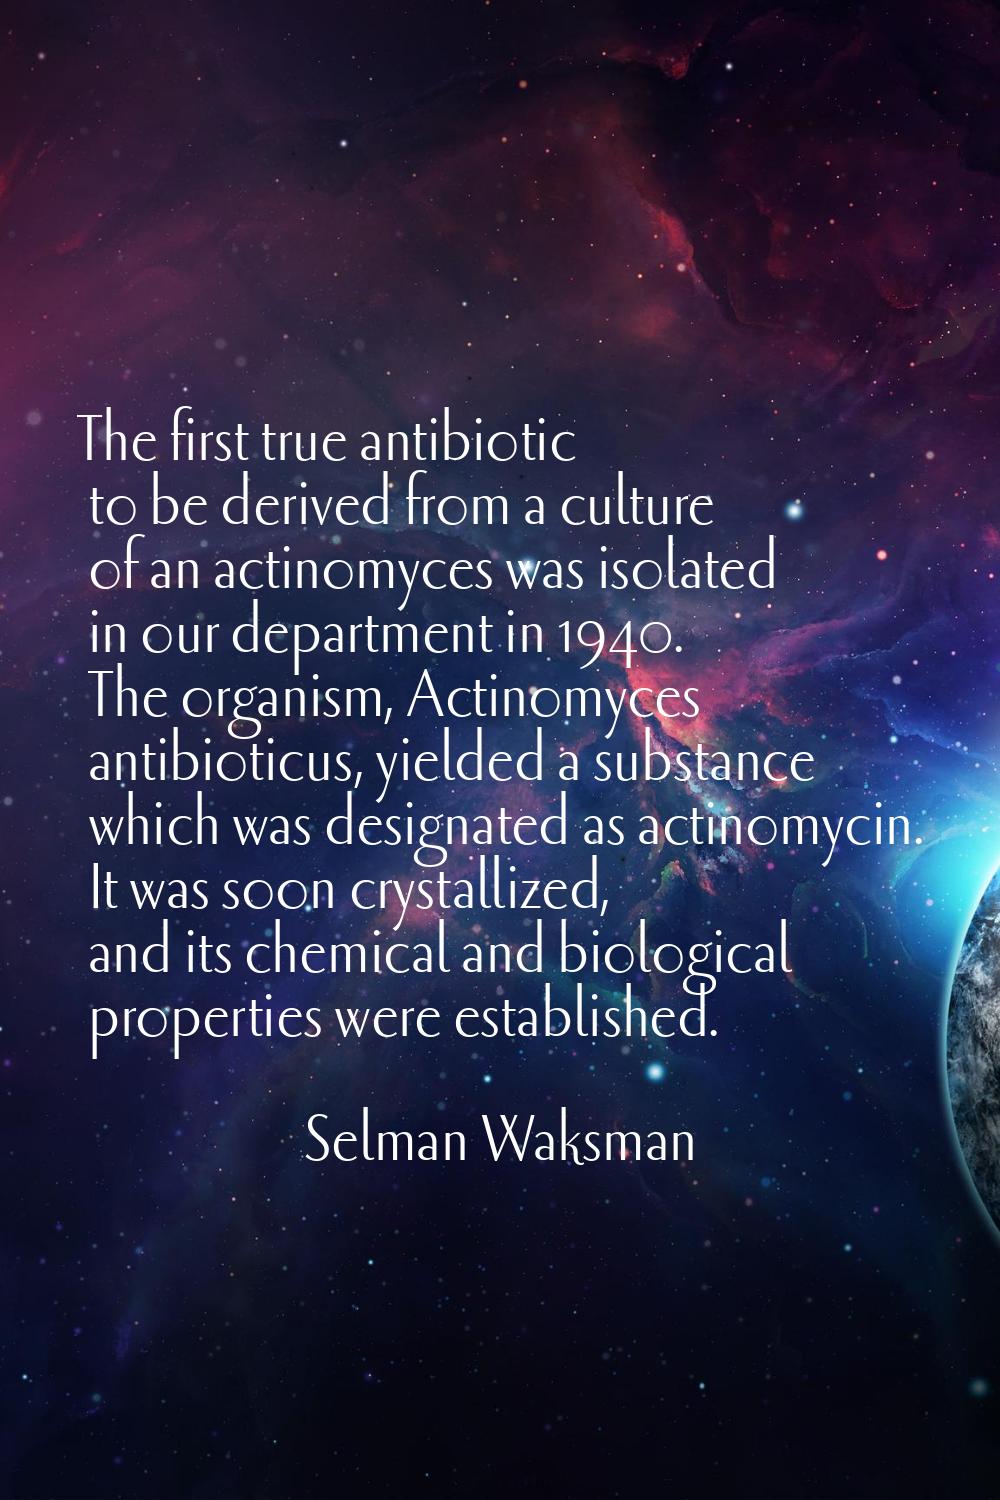 The first true antibiotic to be derived from a culture of an actinomyces was isolated in our depart